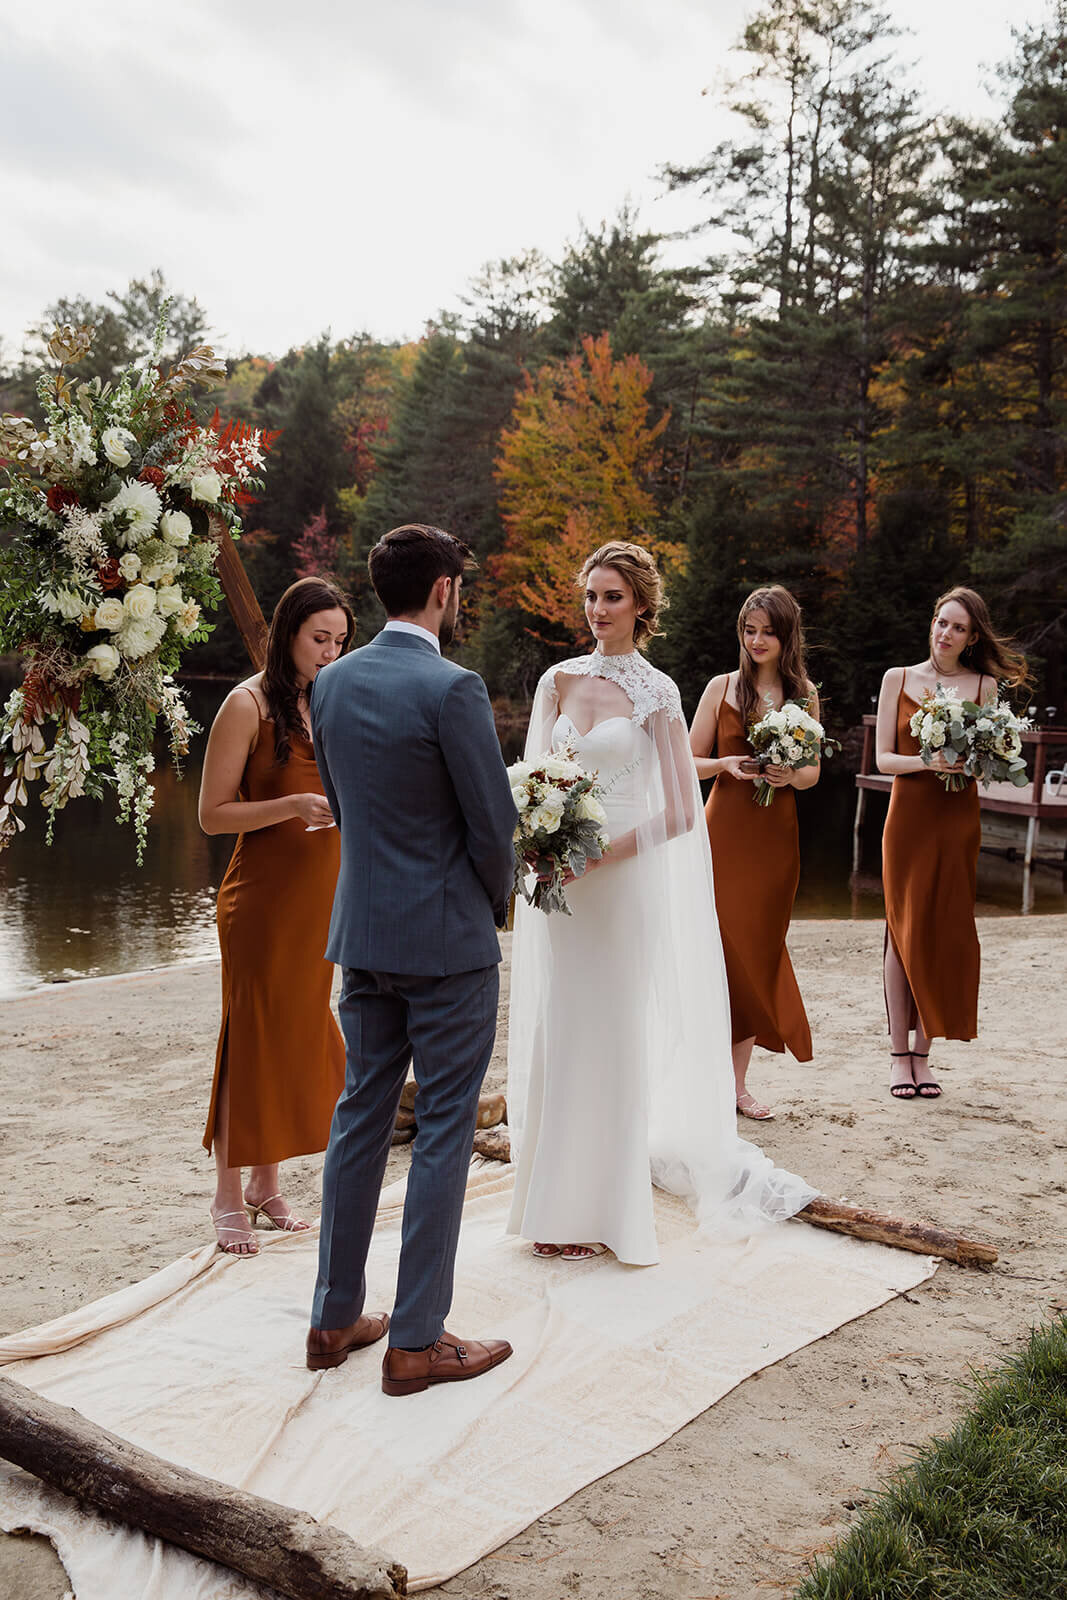  Small outdoor wedding on lake beach during the fall in the Adirondacks in Upstate New York. New York wedding packages. Upstate NY elopement packages. 